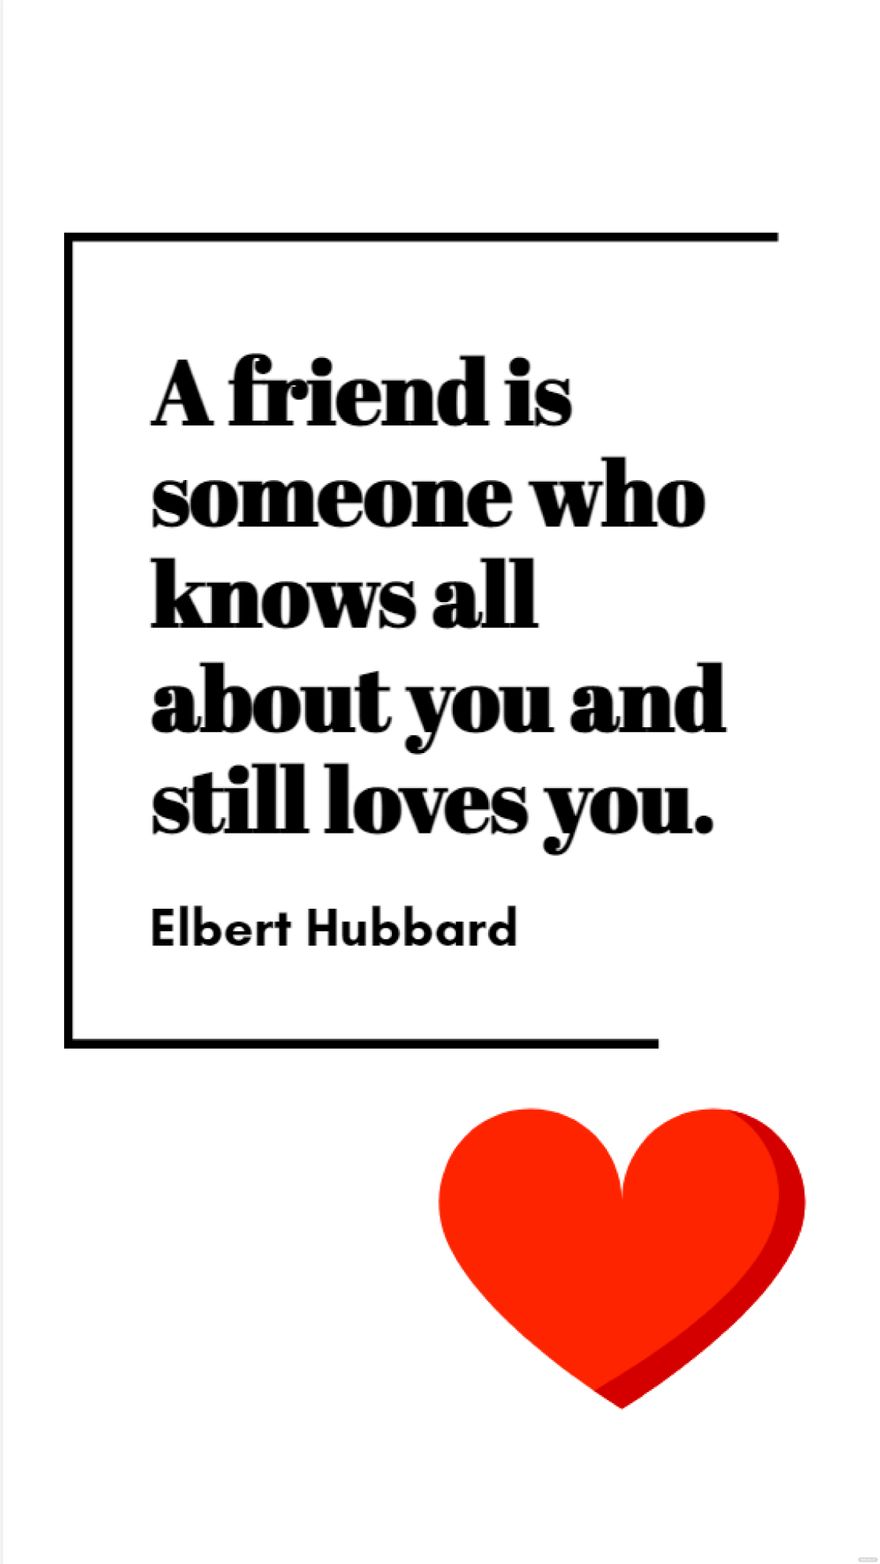 Elbert Hubbard - A friend is someone who knows all about you and still loves you.